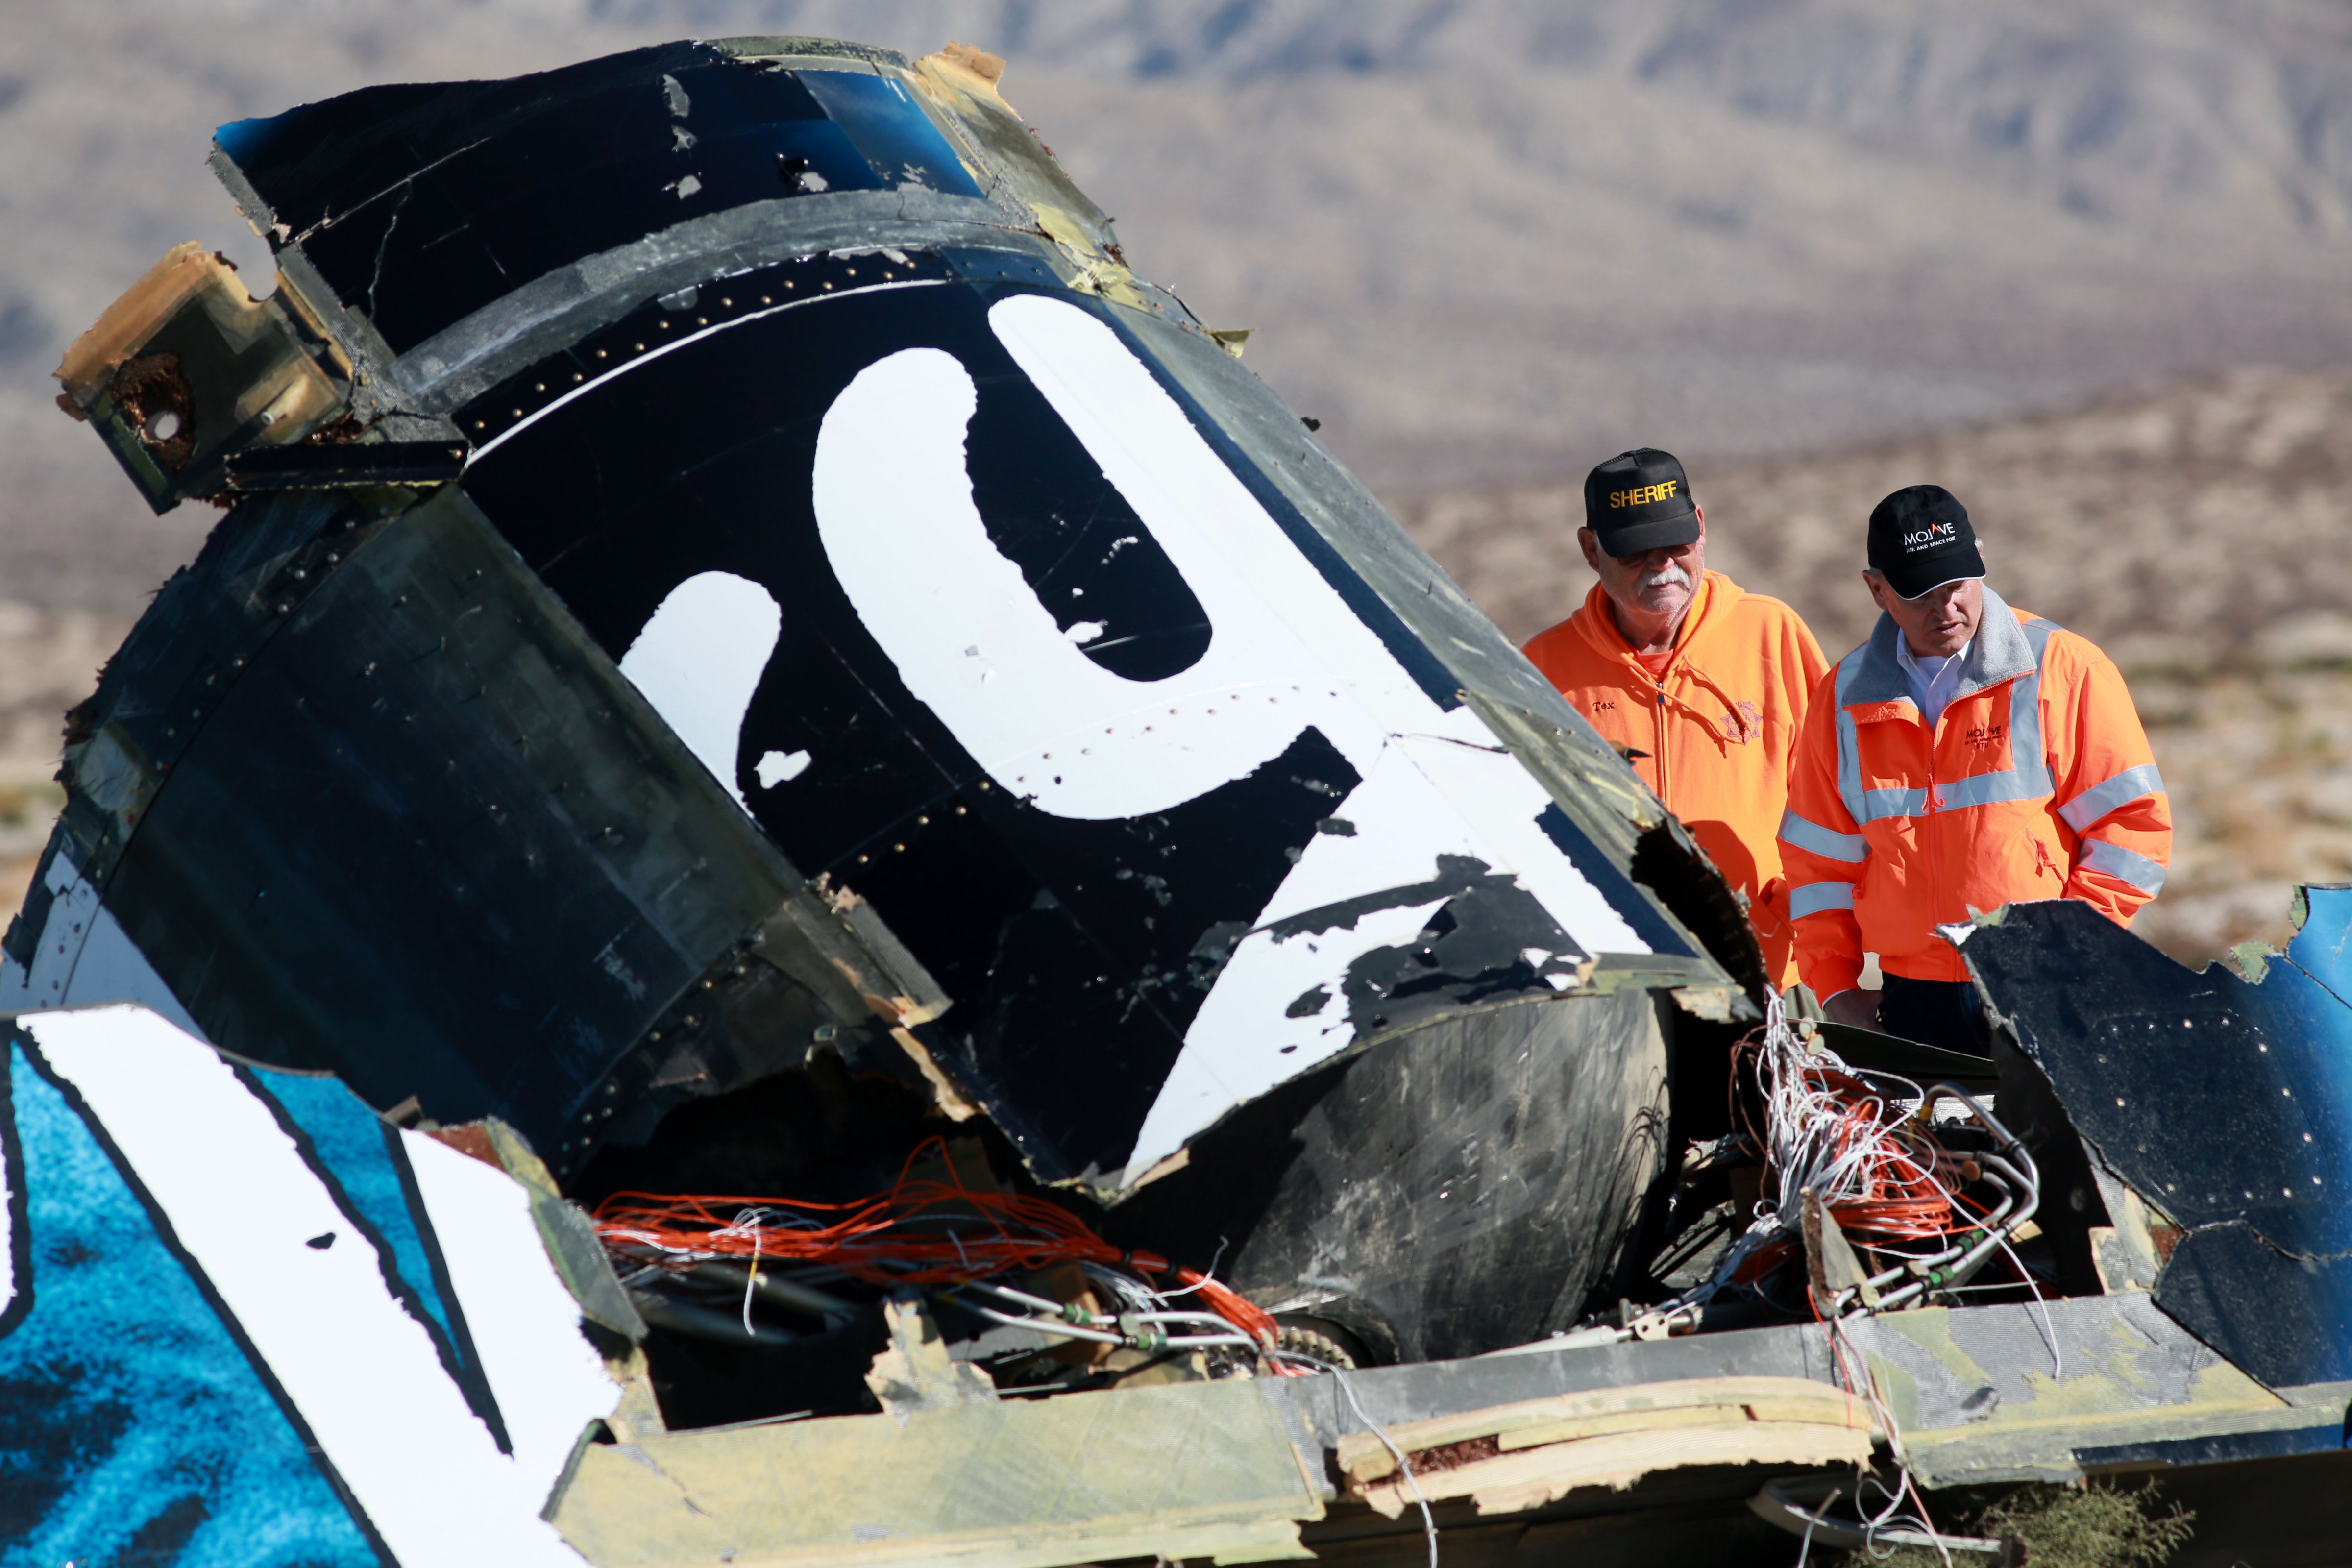 Sheriff's deputies inspect the wreckage of the Virgin Galactic SpaceShip 2 in a desert field November 2, 2014 north of Mojave, California on The Virgin Galactic SpaceShip 2 crashed on October 31, 2014 during a test flight, killing one pilot and seriously injuring another. (Sandy Huffaker&mdash;Getty Images)